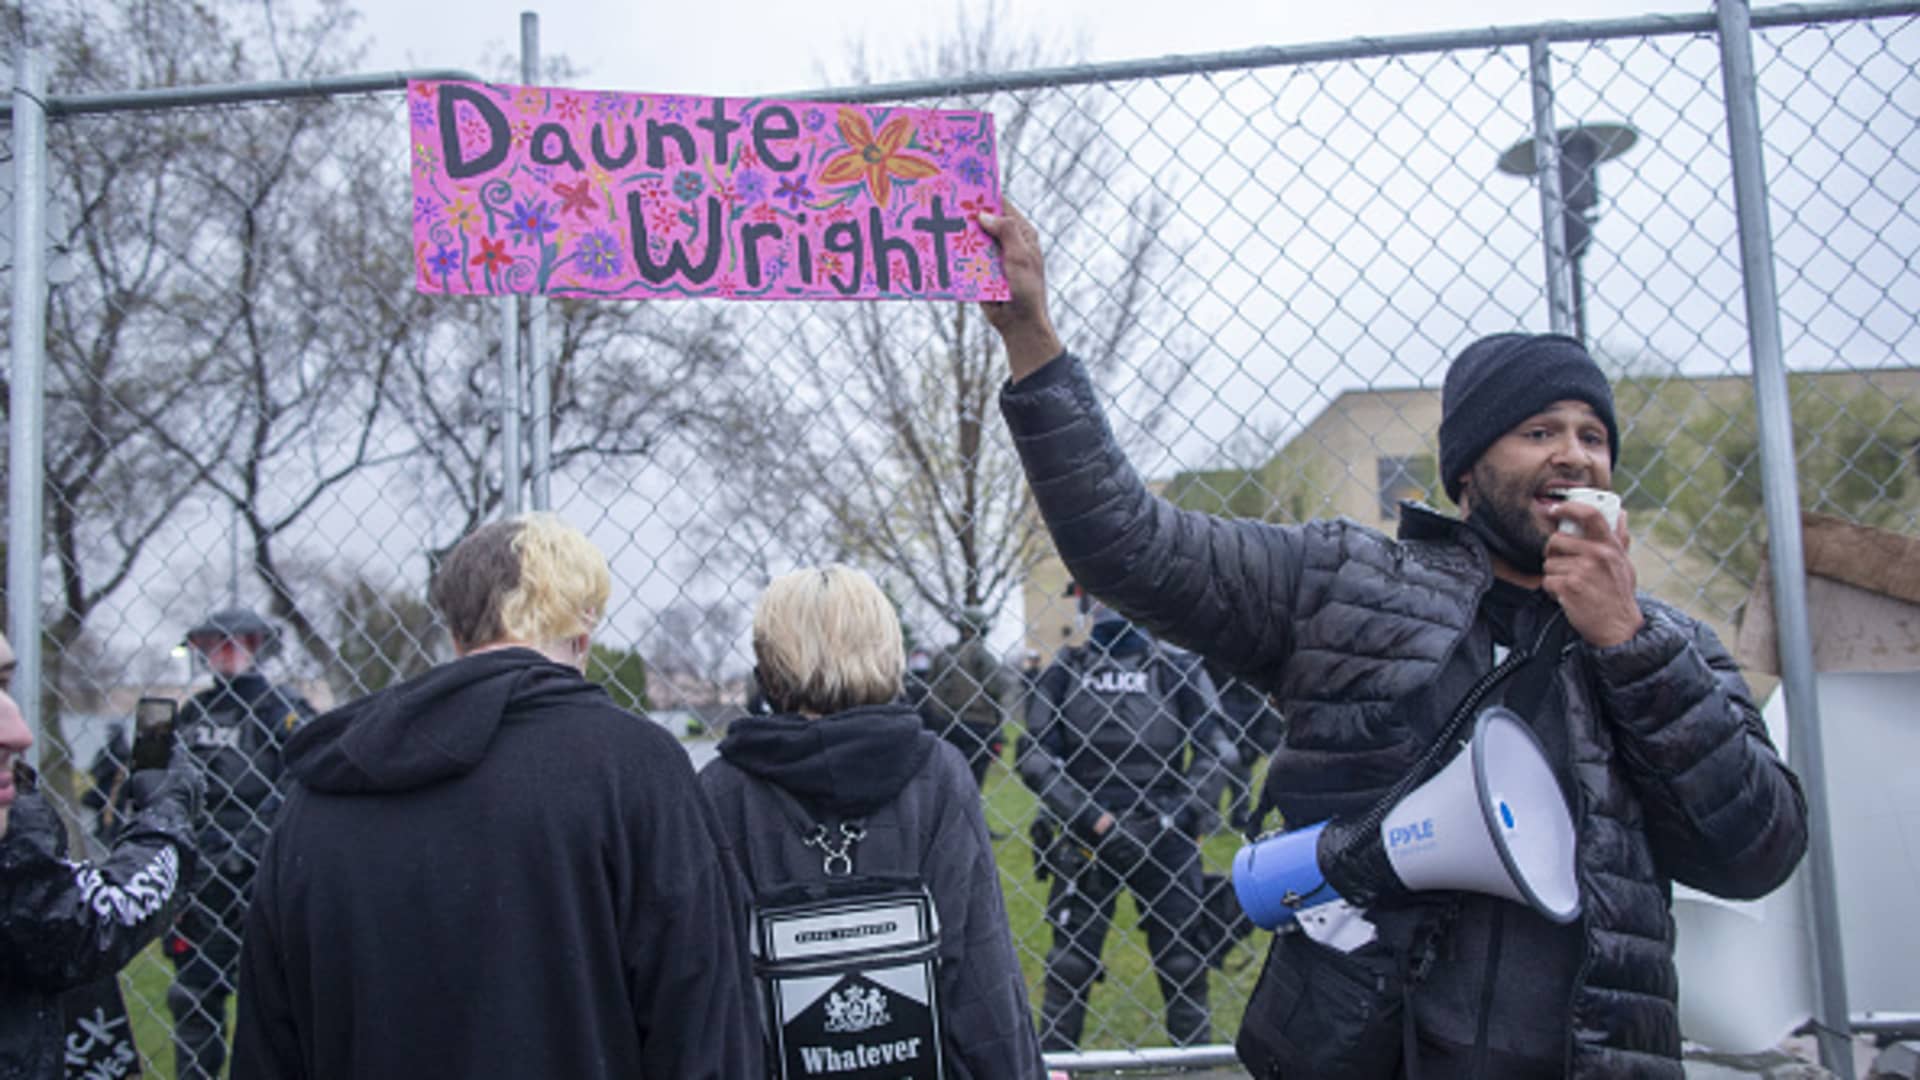 Activist Jonathan Mason holds a Daunte Wright sign in front of the crowd of protesters that gathered to protest the police killing of Daunte Wright in Brooklyn Center, Minnesota, U.S., on April 13, 2021.